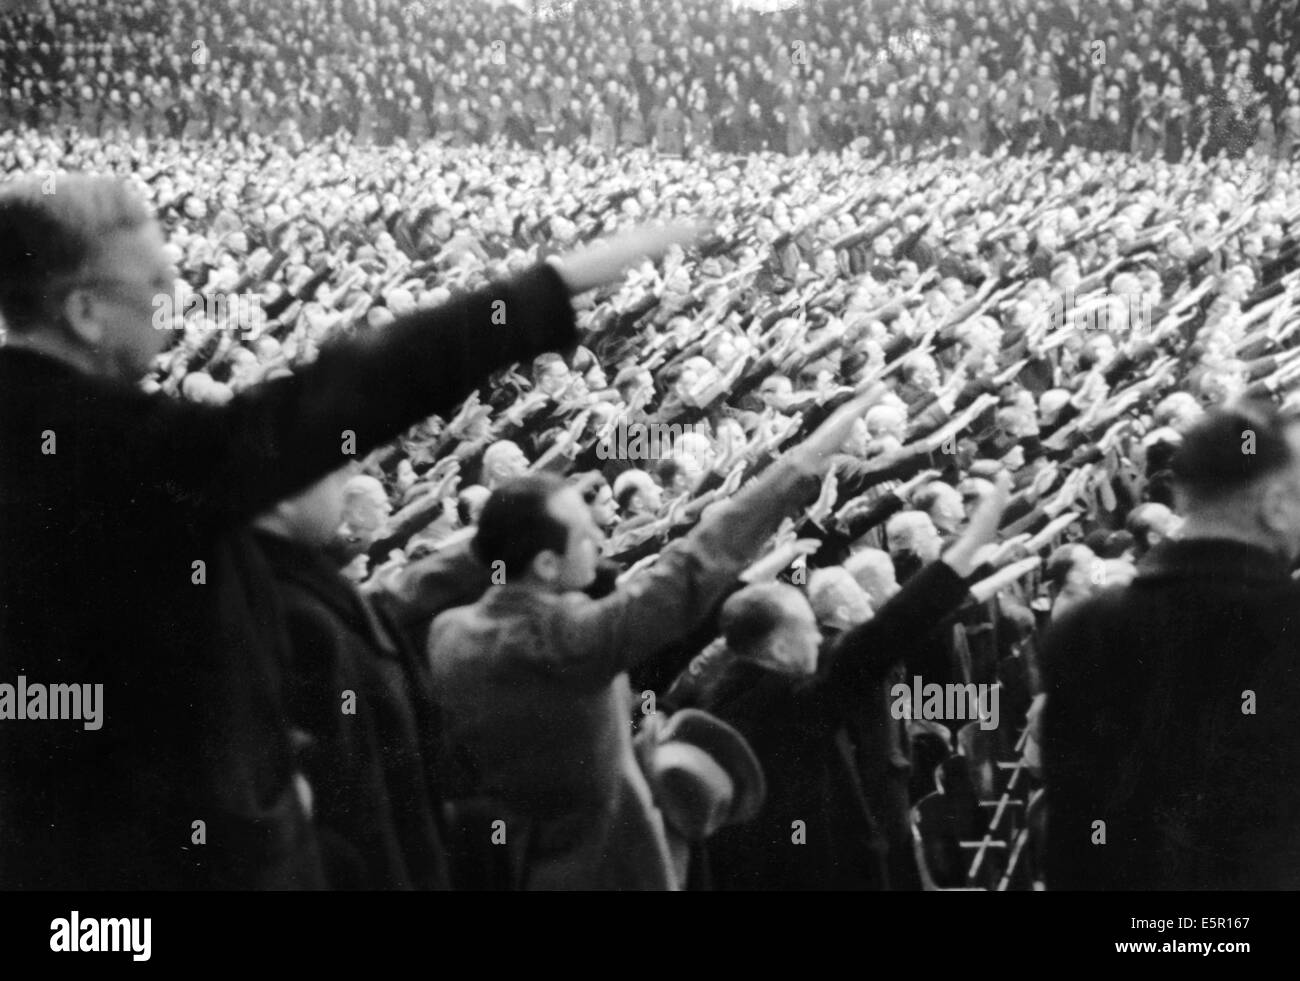 A large group of people listen to the speech by Propaganda Minister Joseph Goebbels, who called for 'total war' at the Sportpalast in Berlin, Germany, 18 February 1943. The original Nazi propaganda text on the back of the picture: 'Special event by the NSDAP. Gau Berlin in the Sportspalast with a speech by the Gauleiter of Berlin, Reich Minister Dr. Goebbels. Our picture shows thousands of spectators showing their never-ending consent as Reich Minister Dr. Goebbels asked the listeners, a group that embodied the entire German people from all ranks, for approval of the measures related to total  Stock Photo